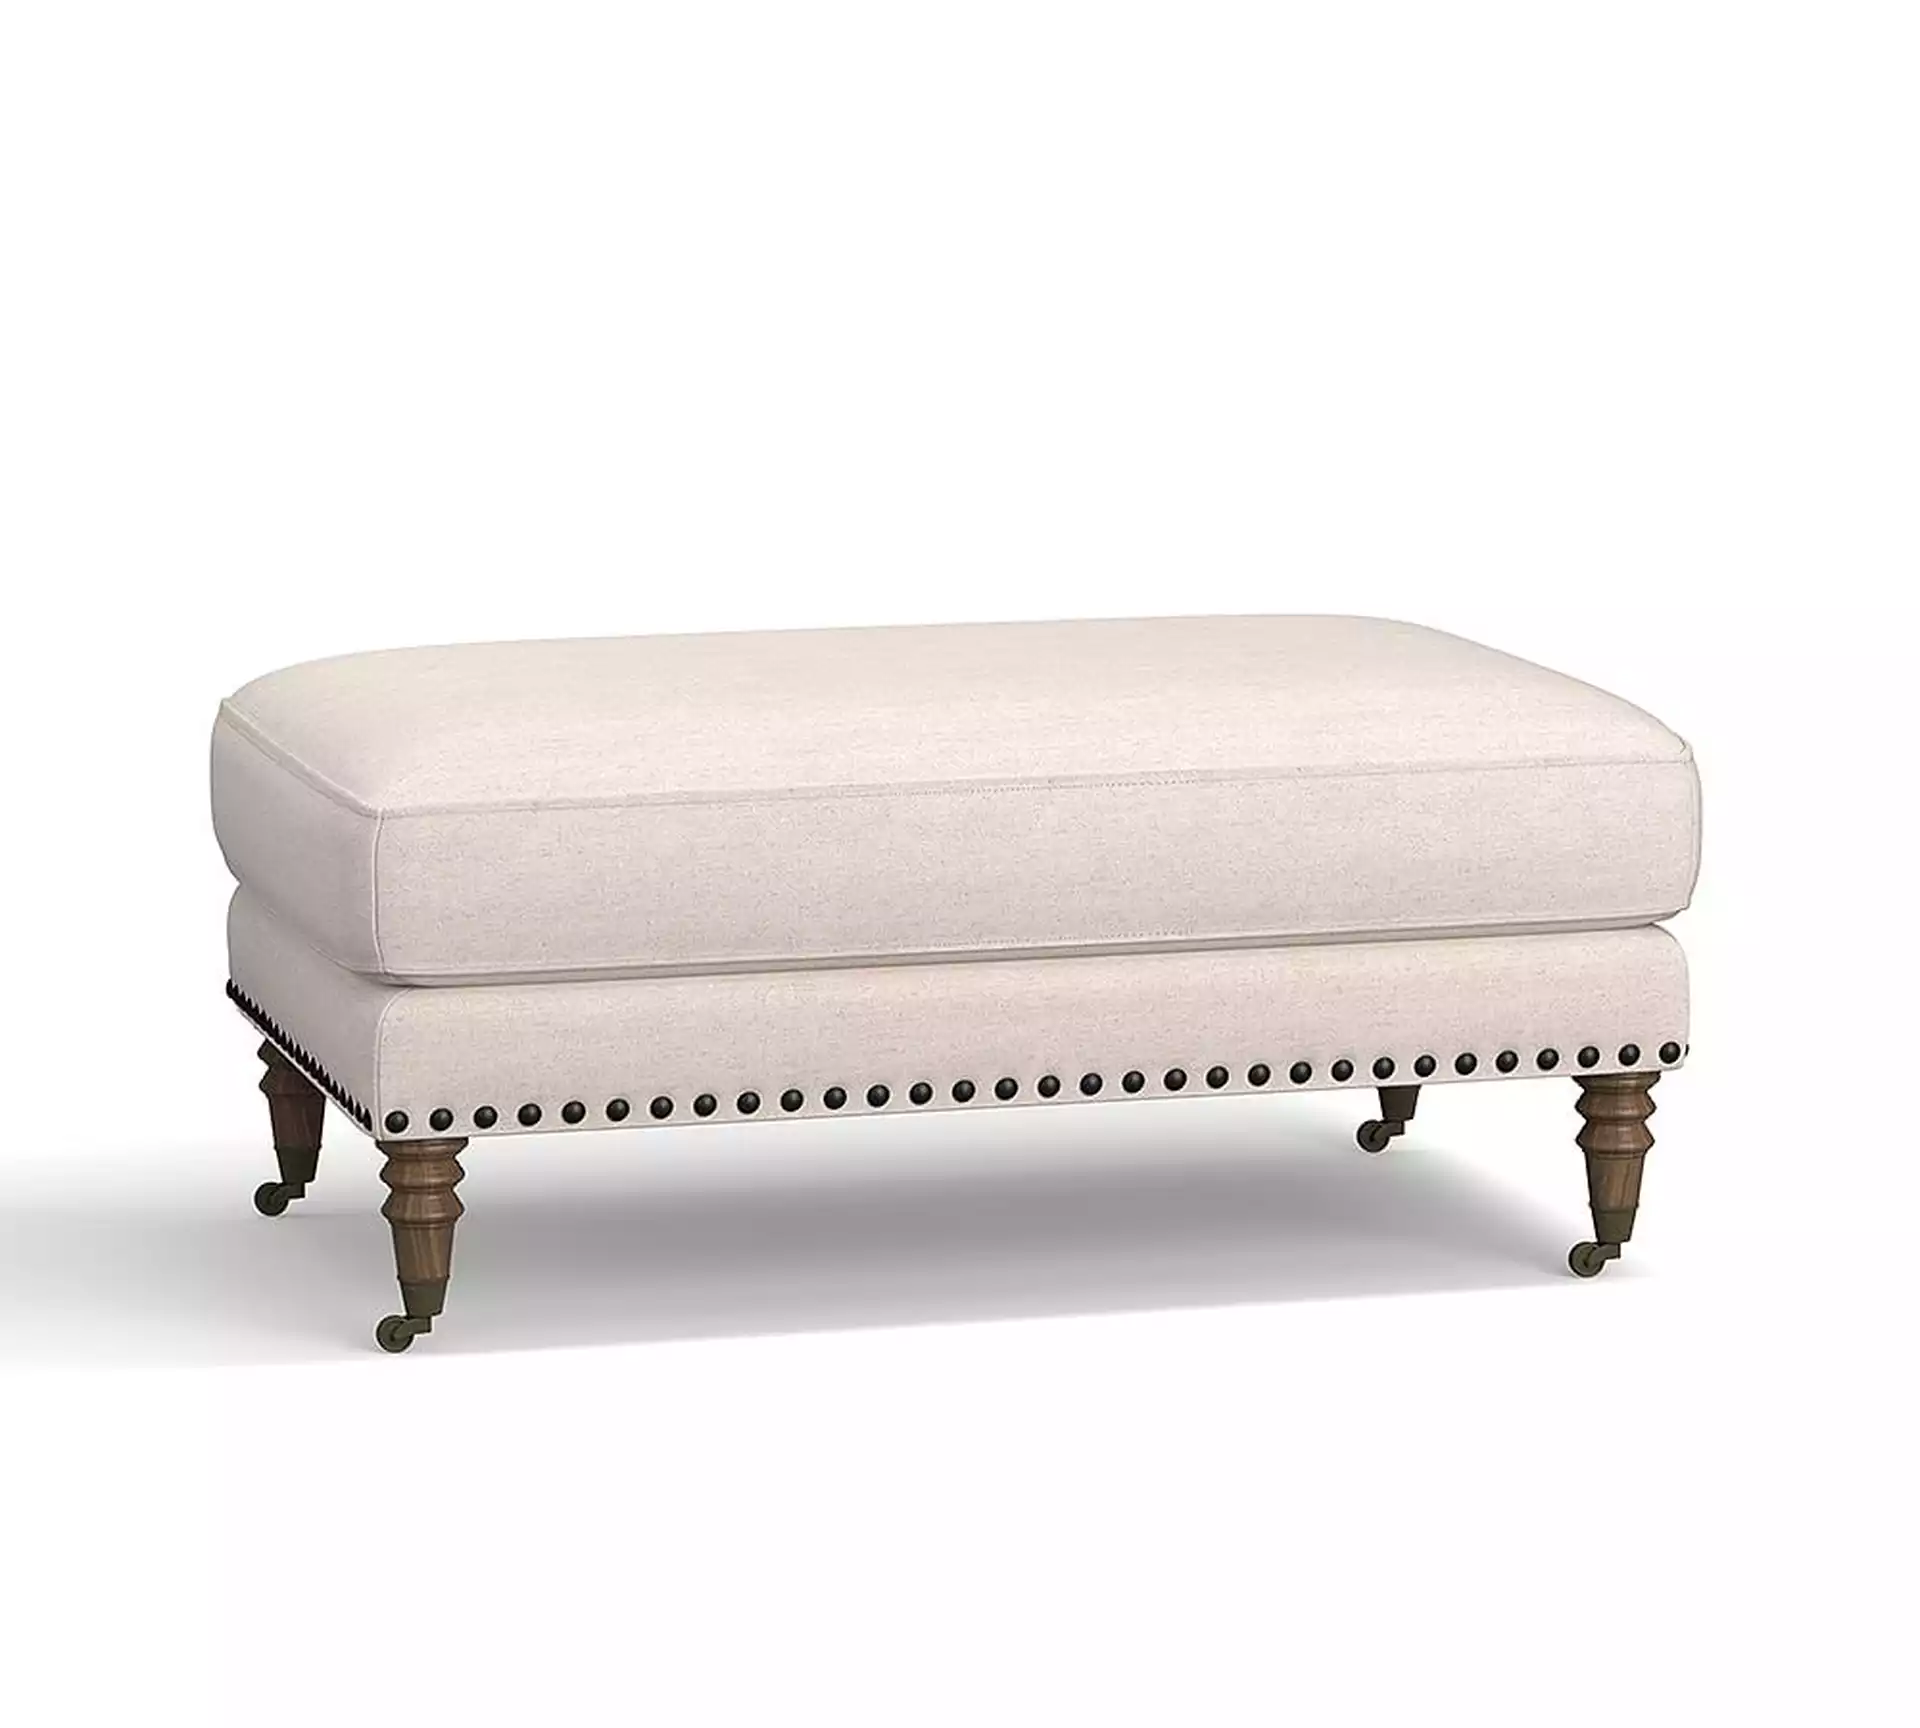 Tallulah Upholstered Ottoman, Polyester Wrapped Cushions, Performance Heathered Basketweave Navy